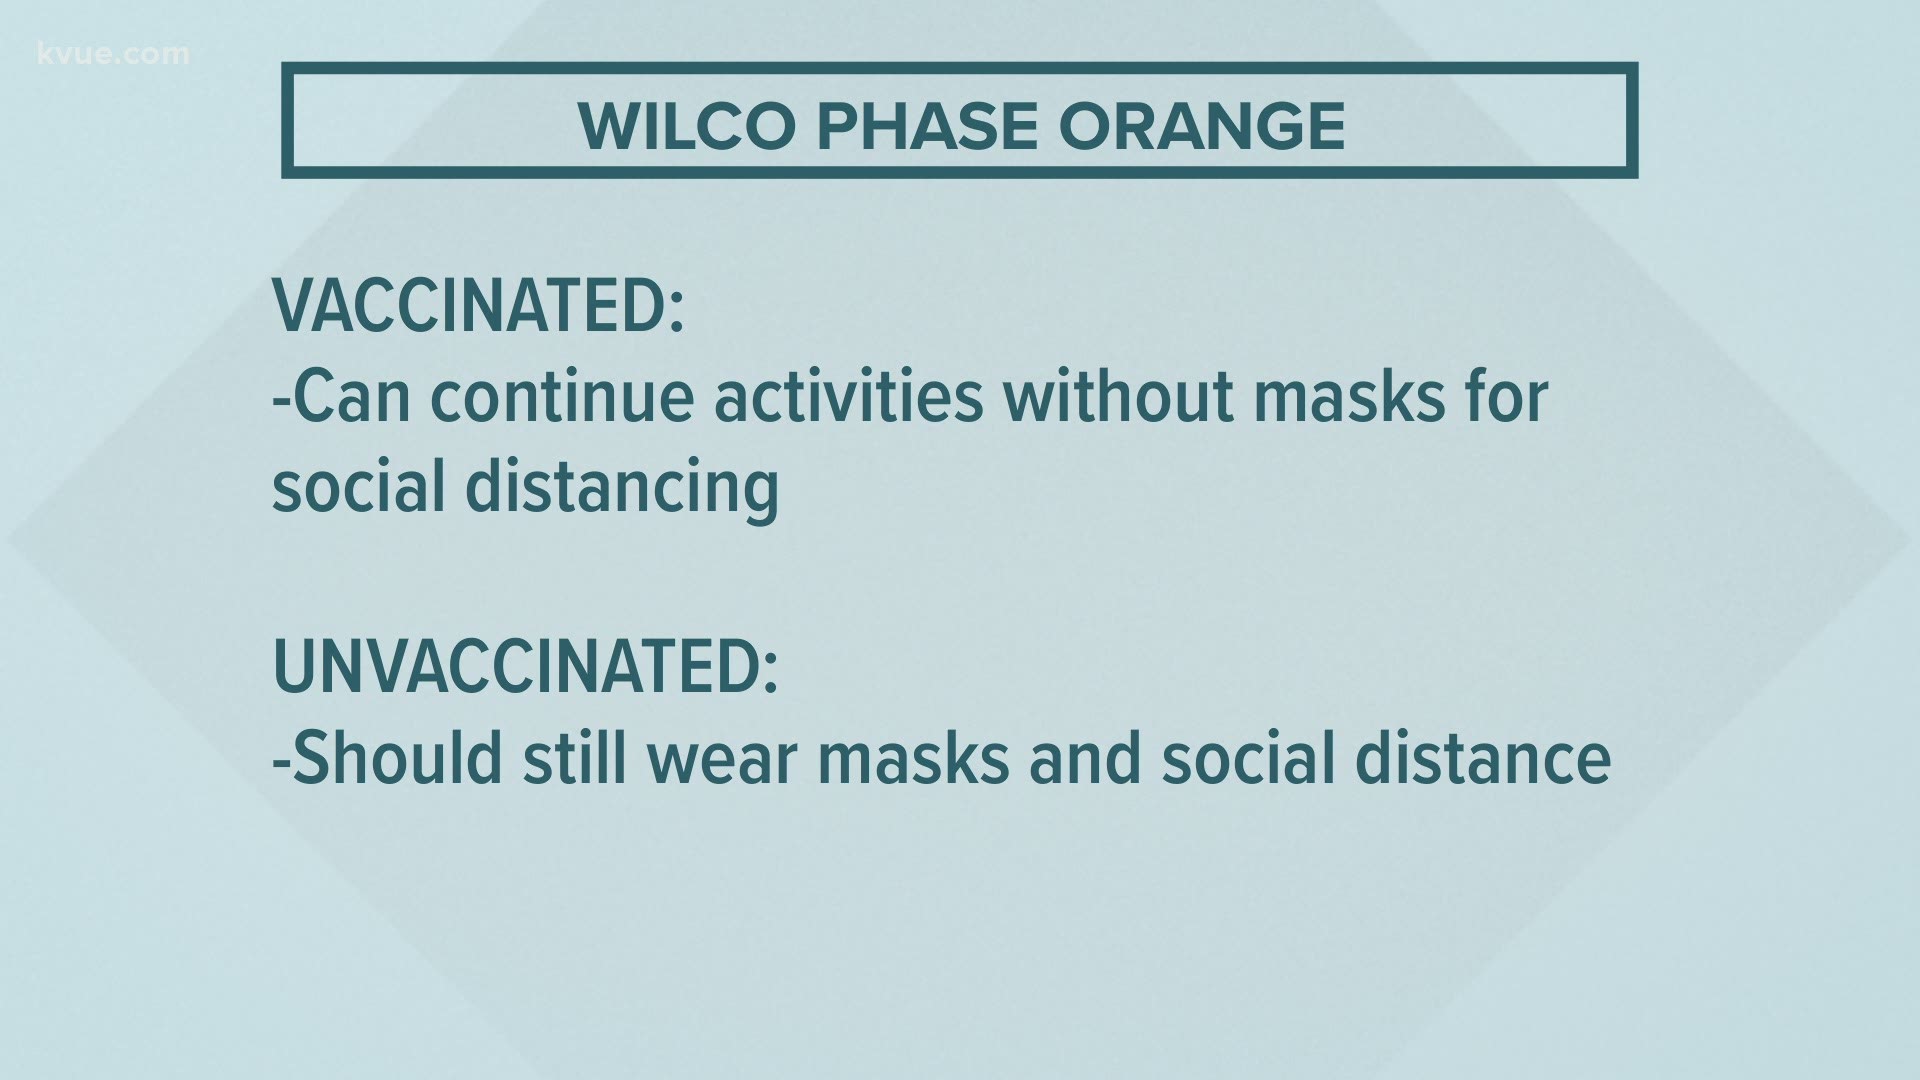 The criteria set by the WCCHD was initially reached on July 5 and had been sustained and rising since then. The "Orange Phase" indicates high community spread.